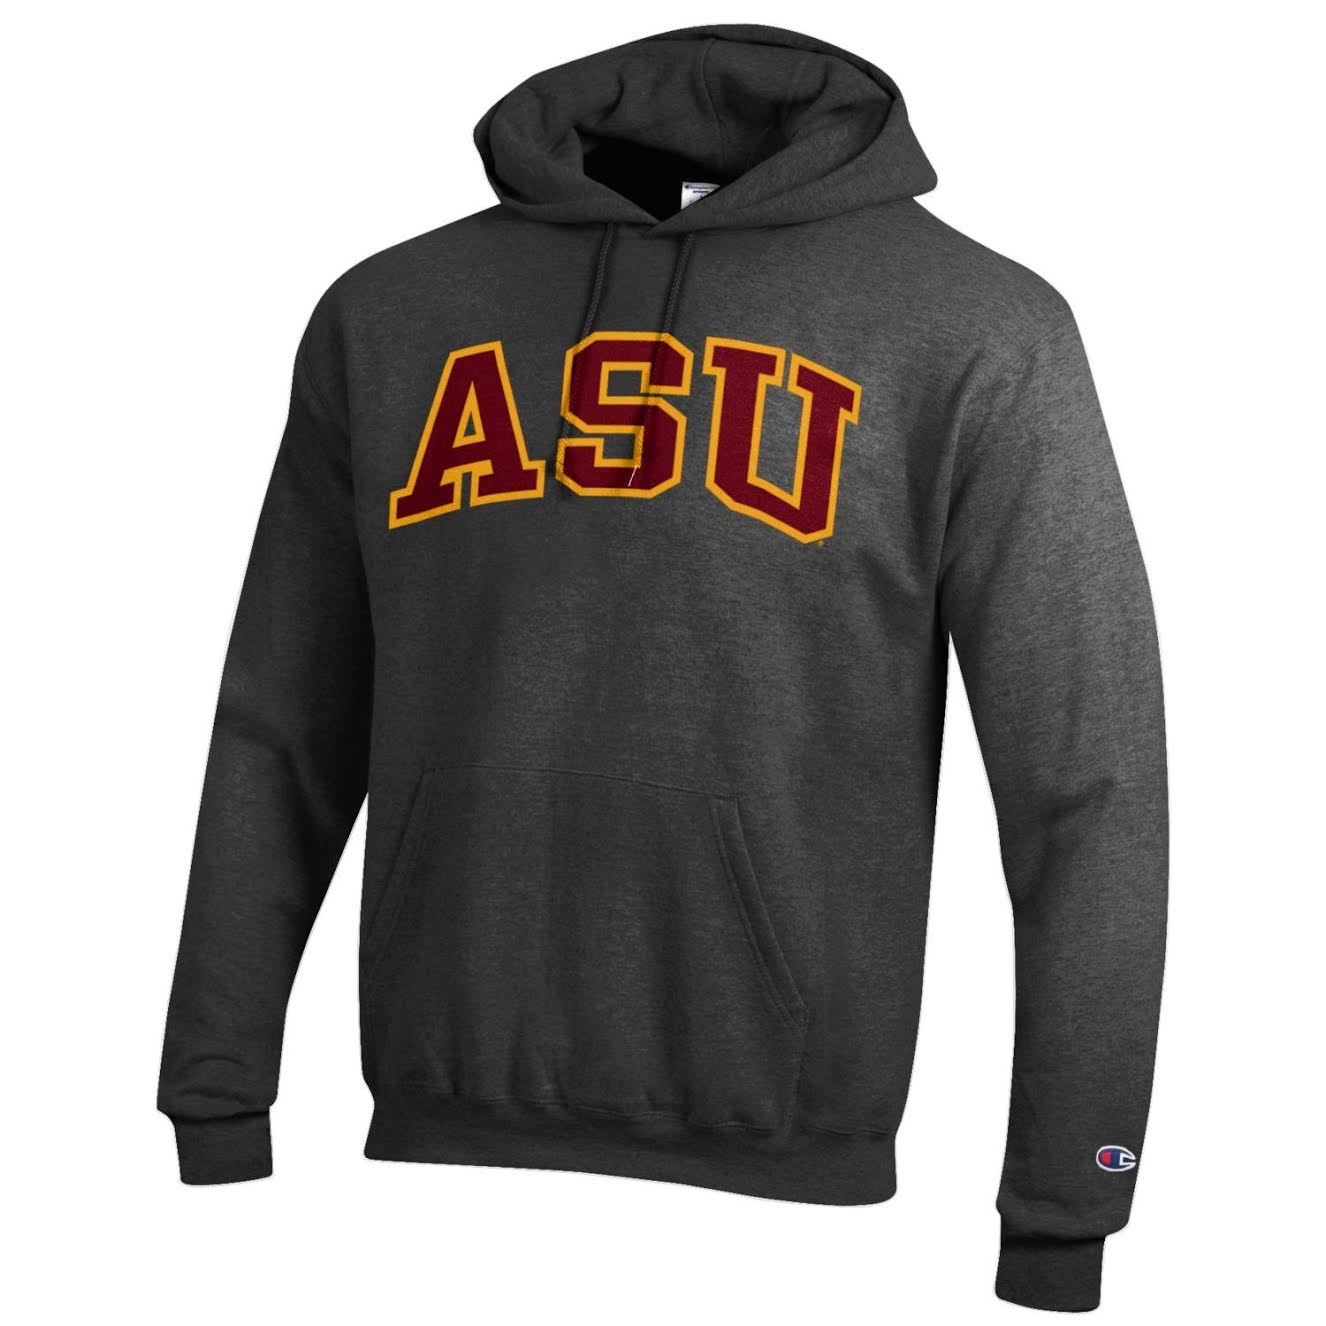 ASU gray champion hoodie with ASU stitched across chest.